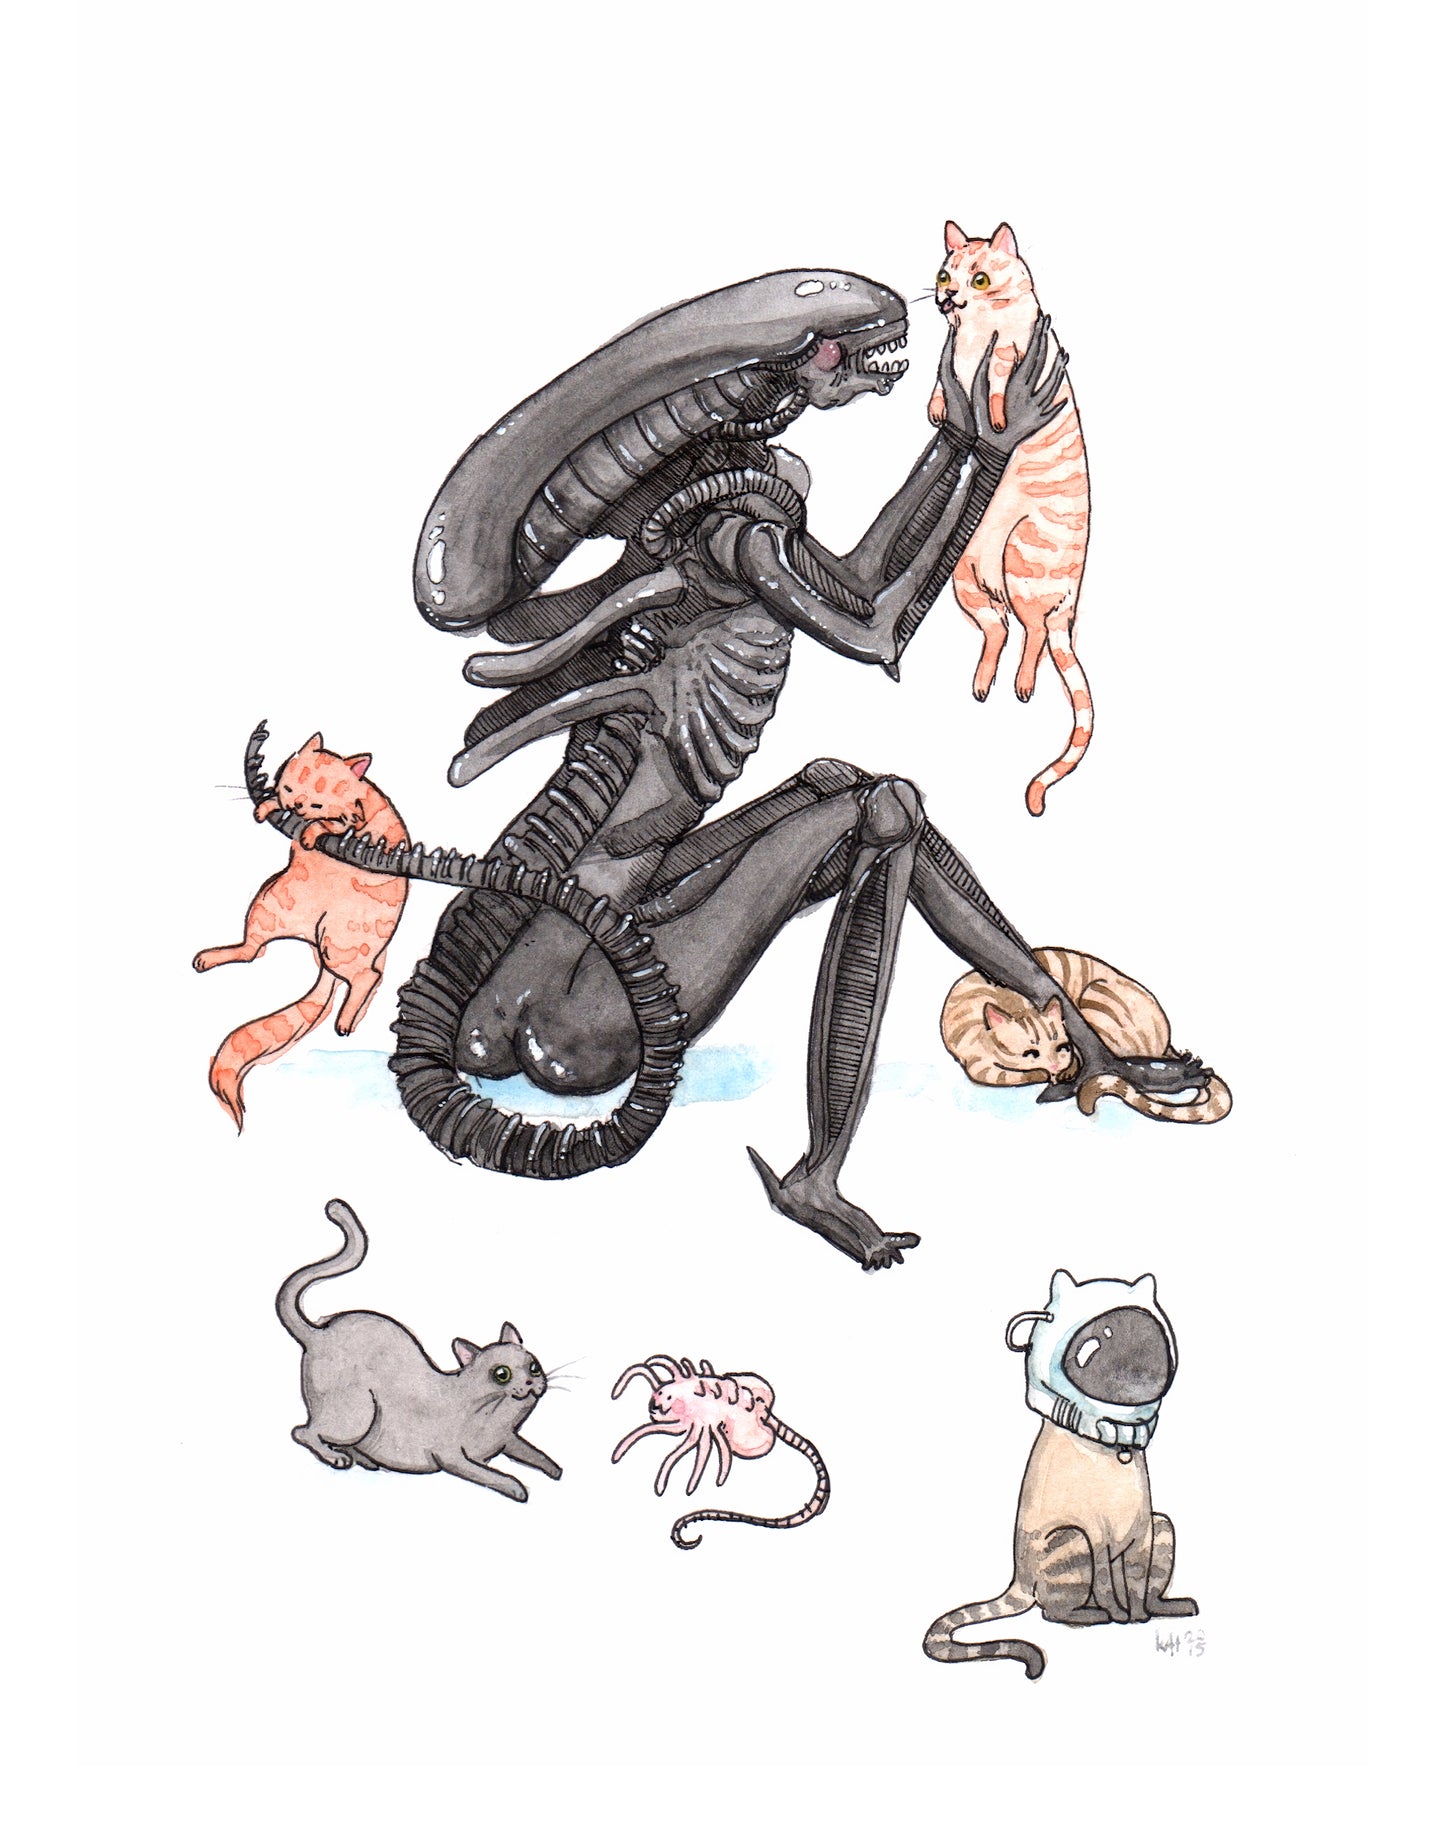 Extra-purrestrial - Alien with Cats Print - - Available in 5x7", 8x10", & 11x14"